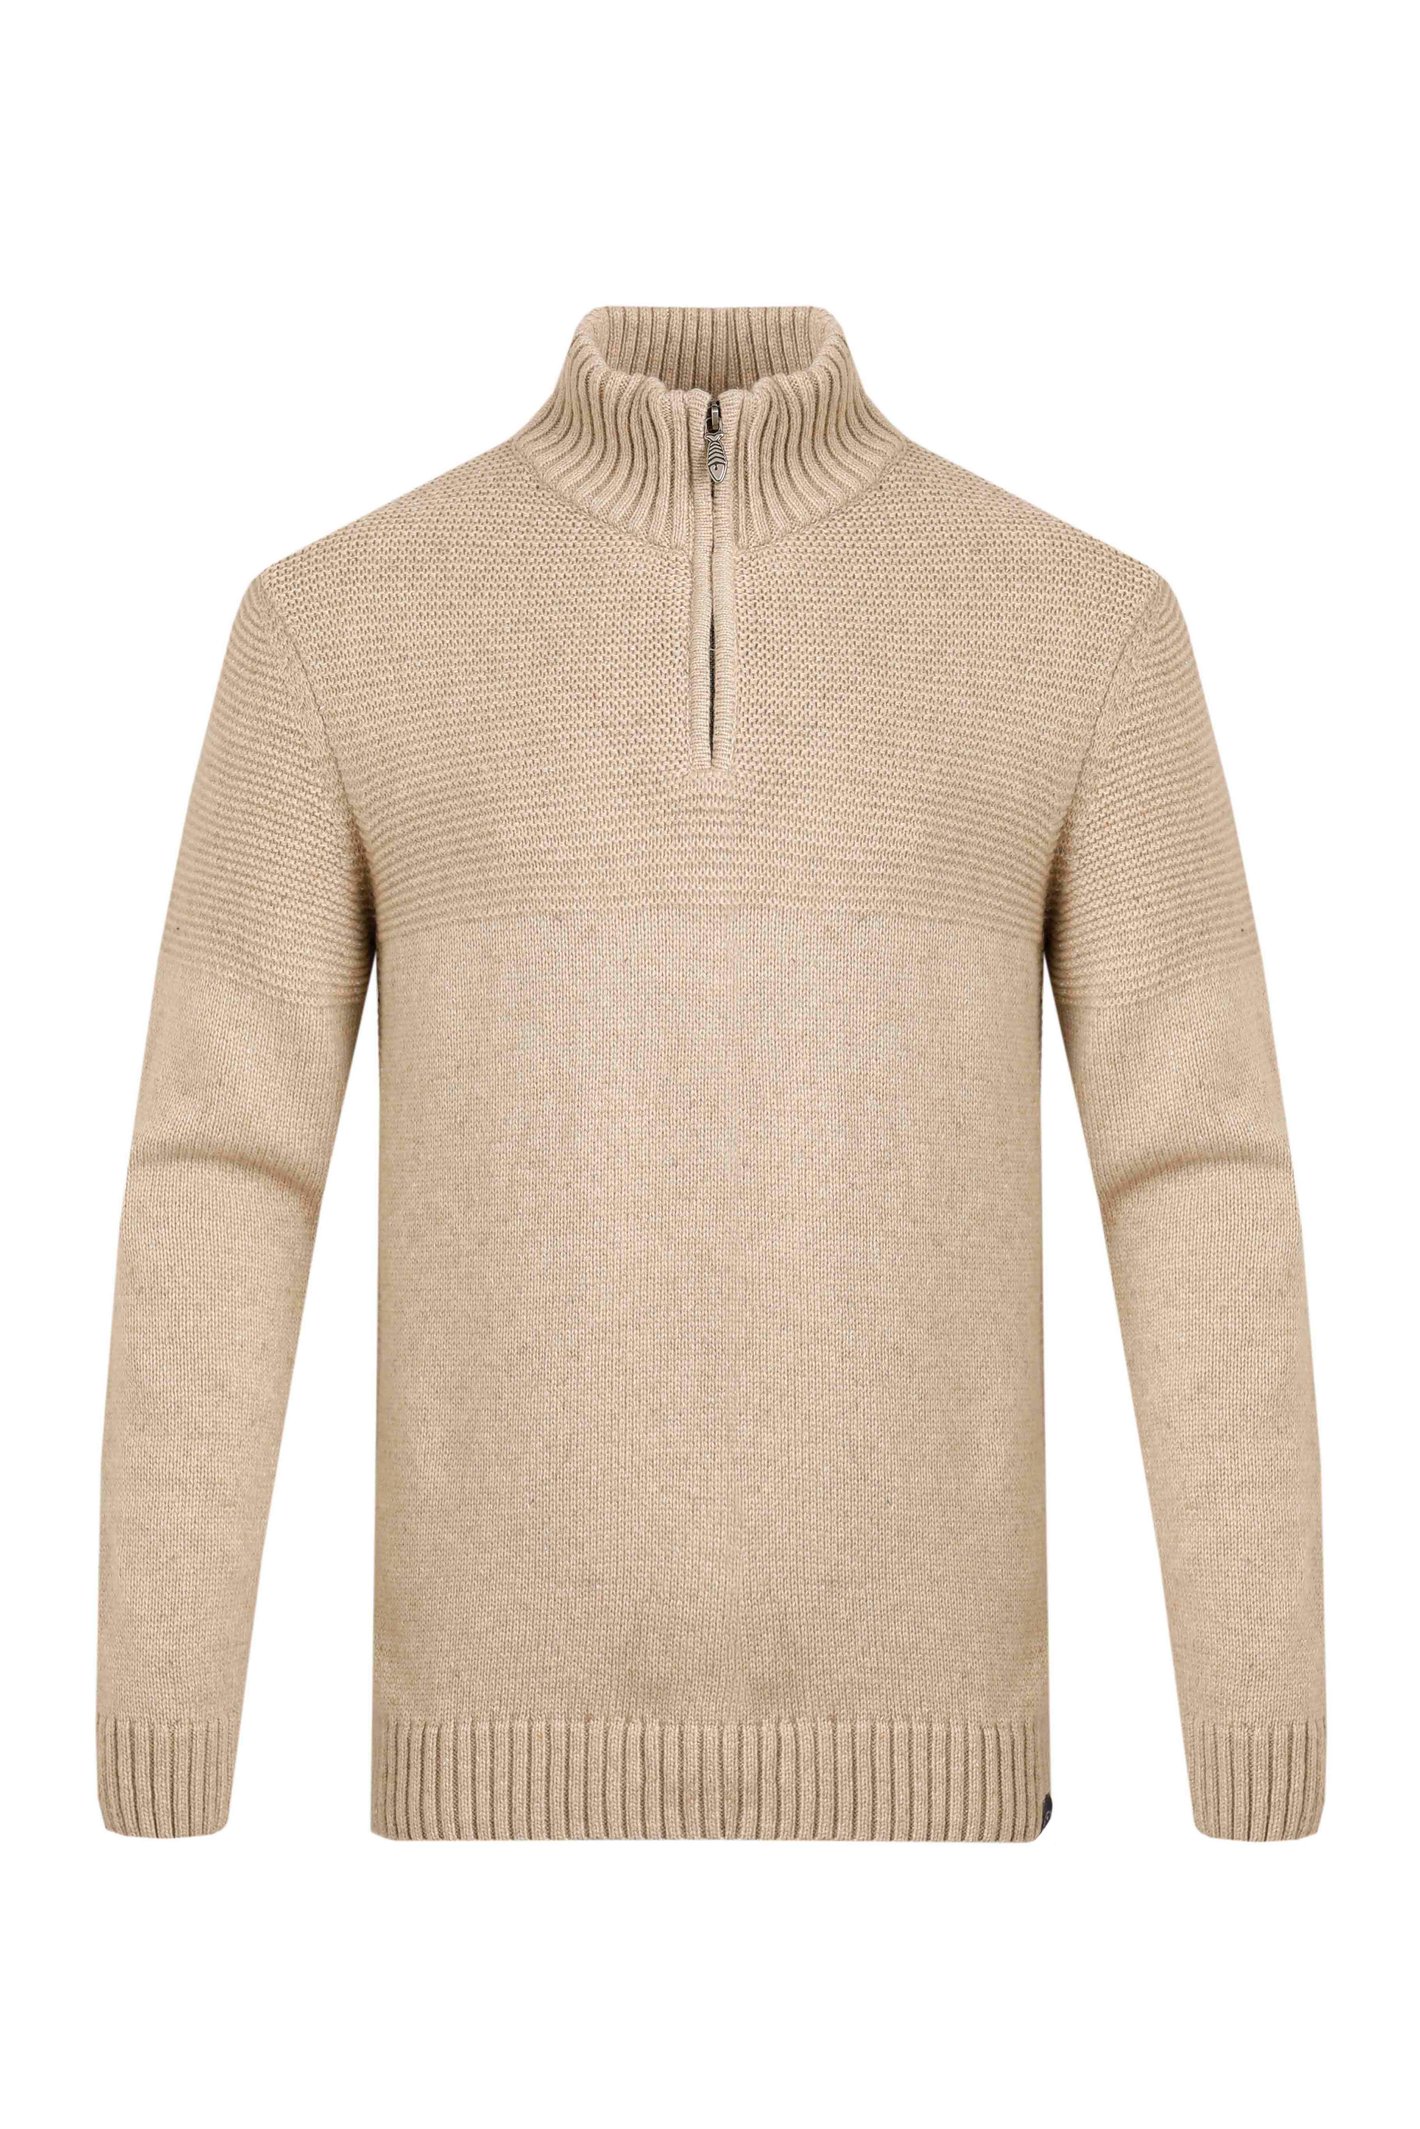 Men's Lambswool Cable Knit Half Zip Jumper from Crew Clothing Company